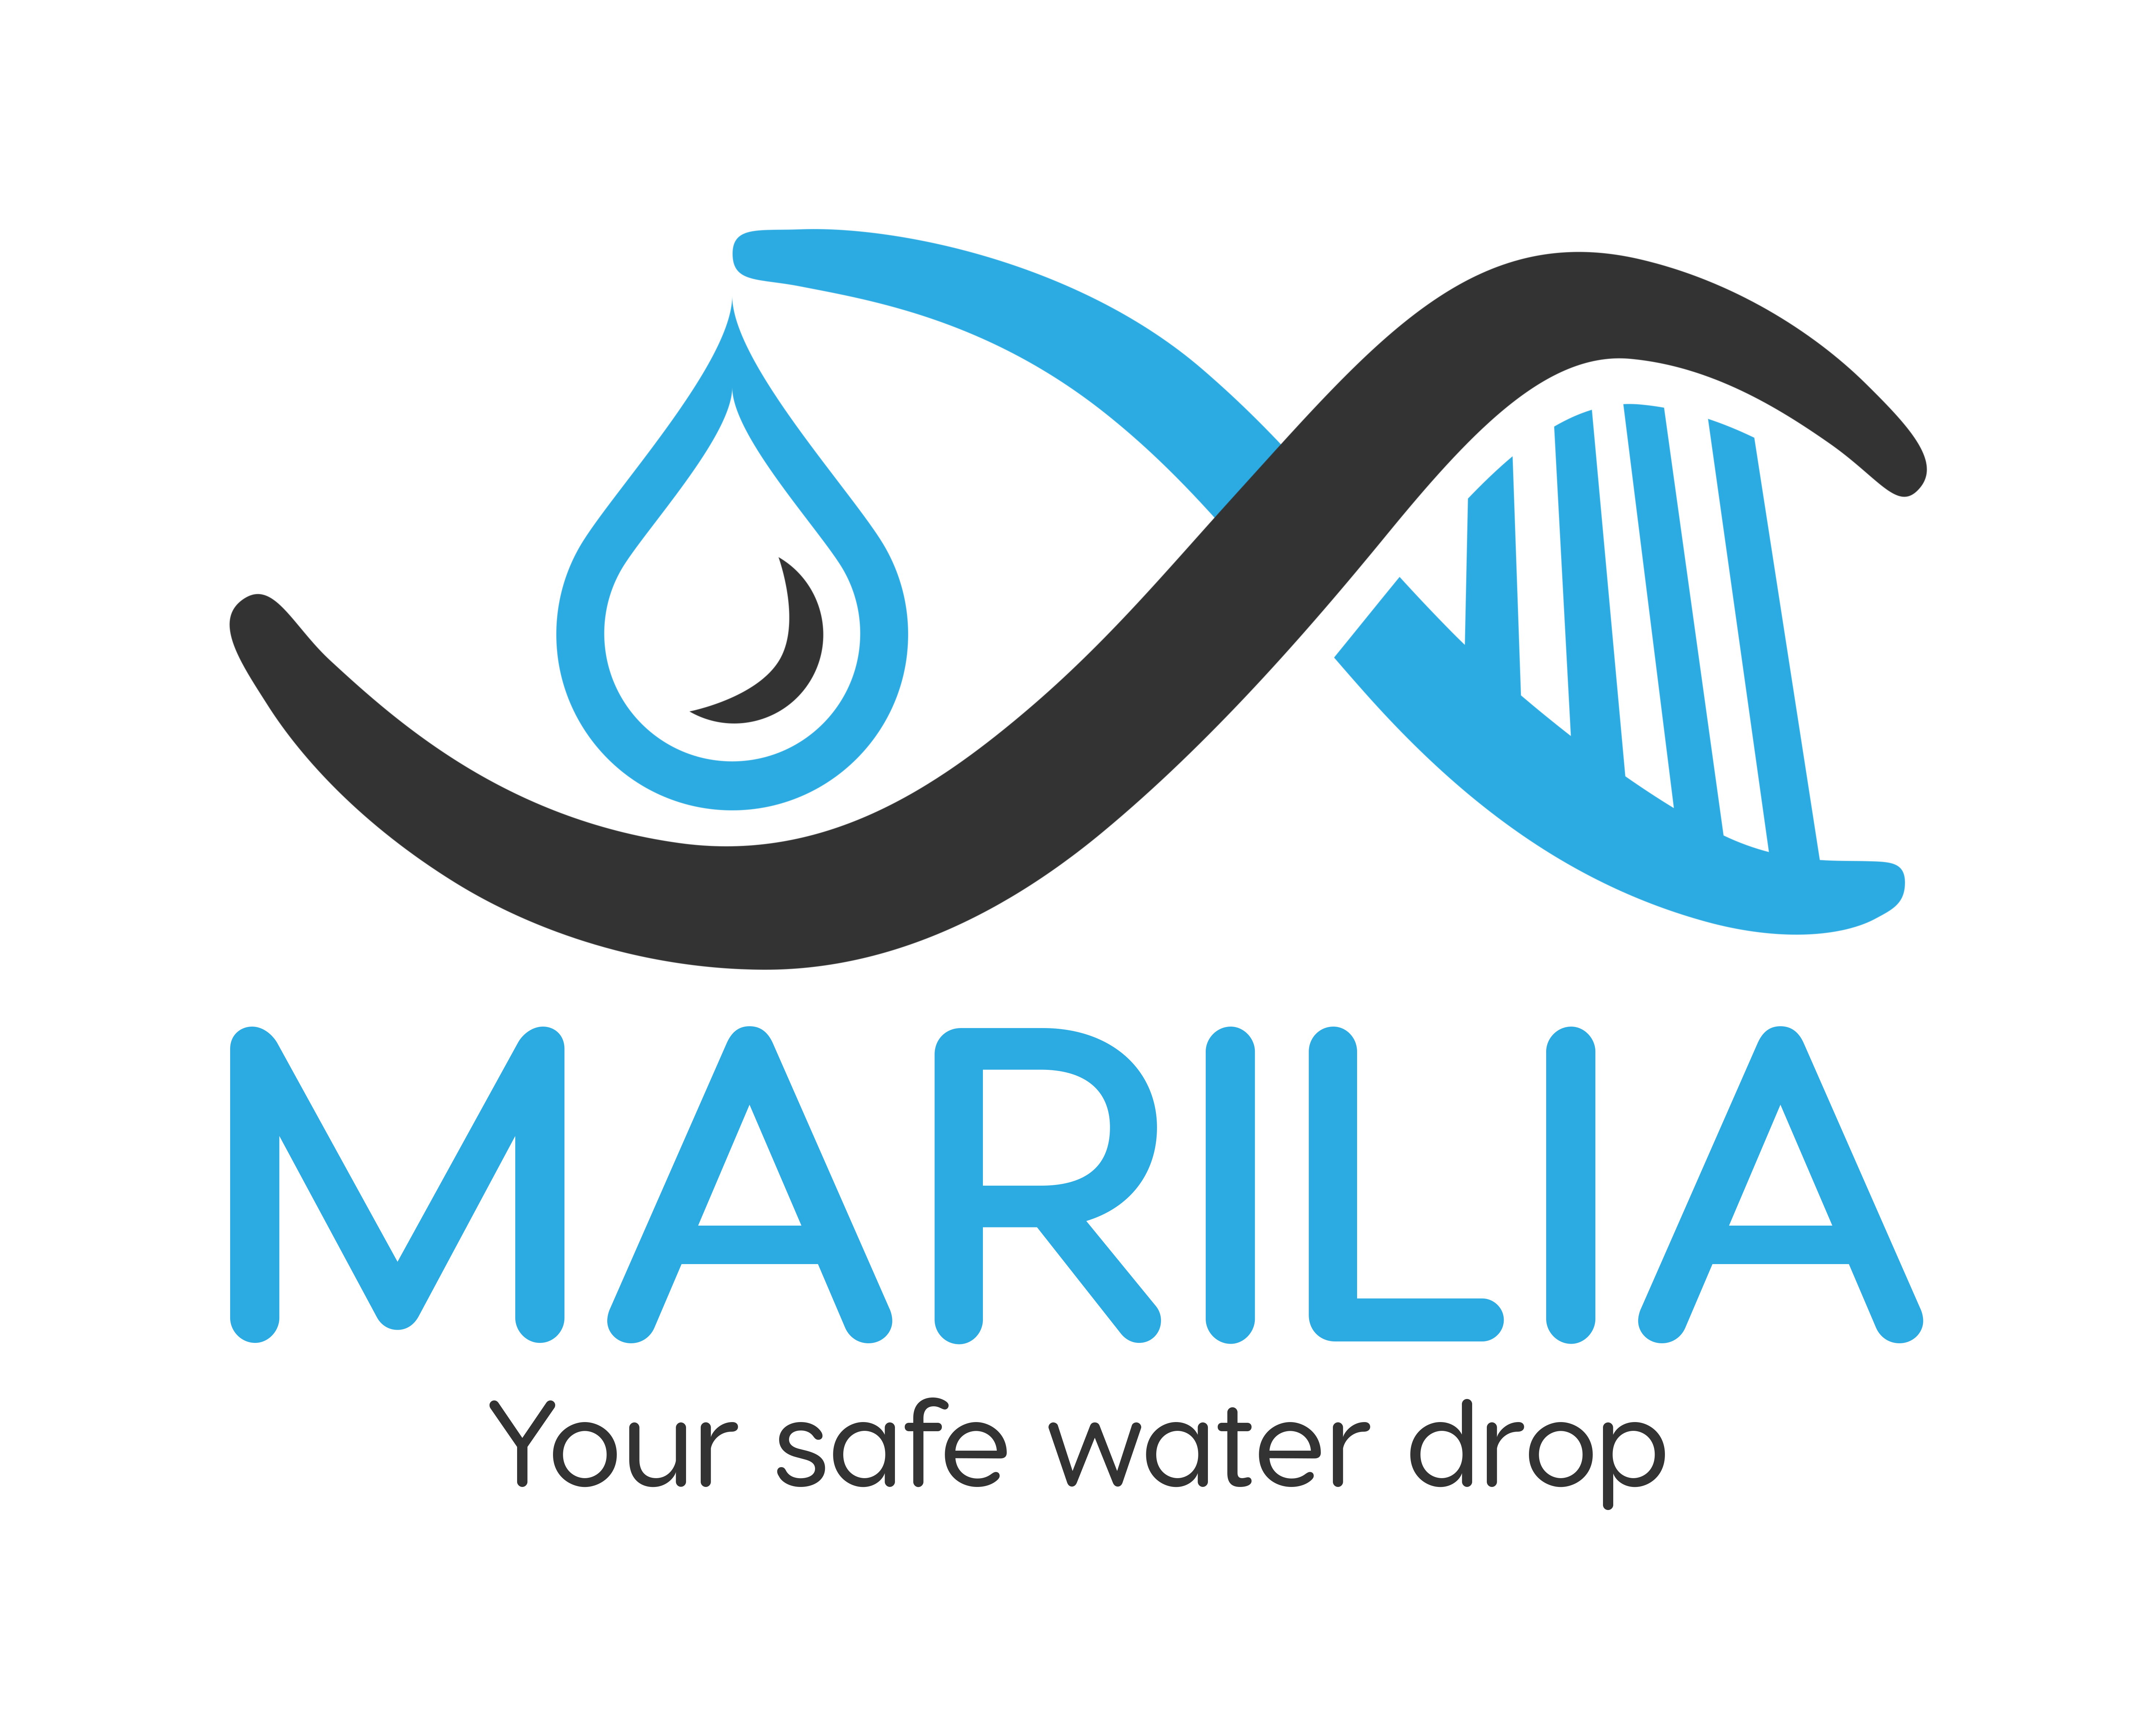 MARILIA - YOUR SAFE WATER DROP We are building novel pathogen detection test for the analysis of water samples